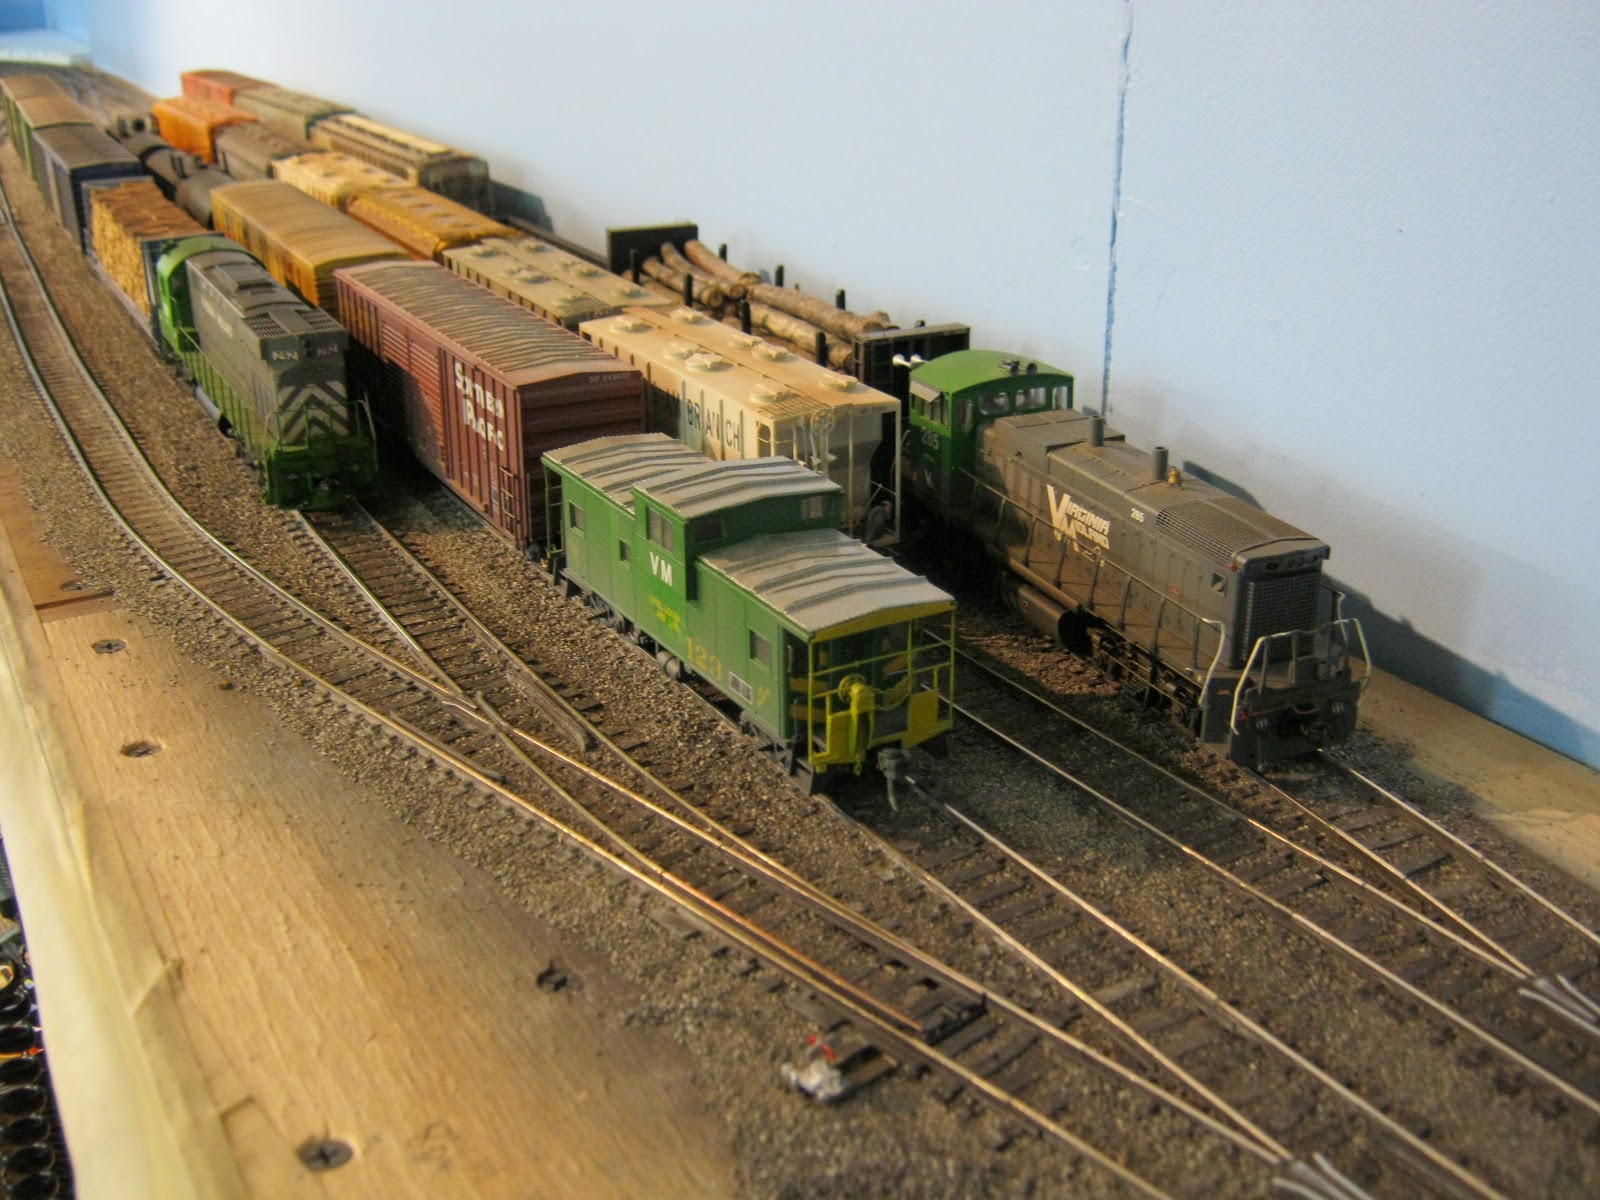  lead end. Notice the MP15DC. She's the main switcher in the yard